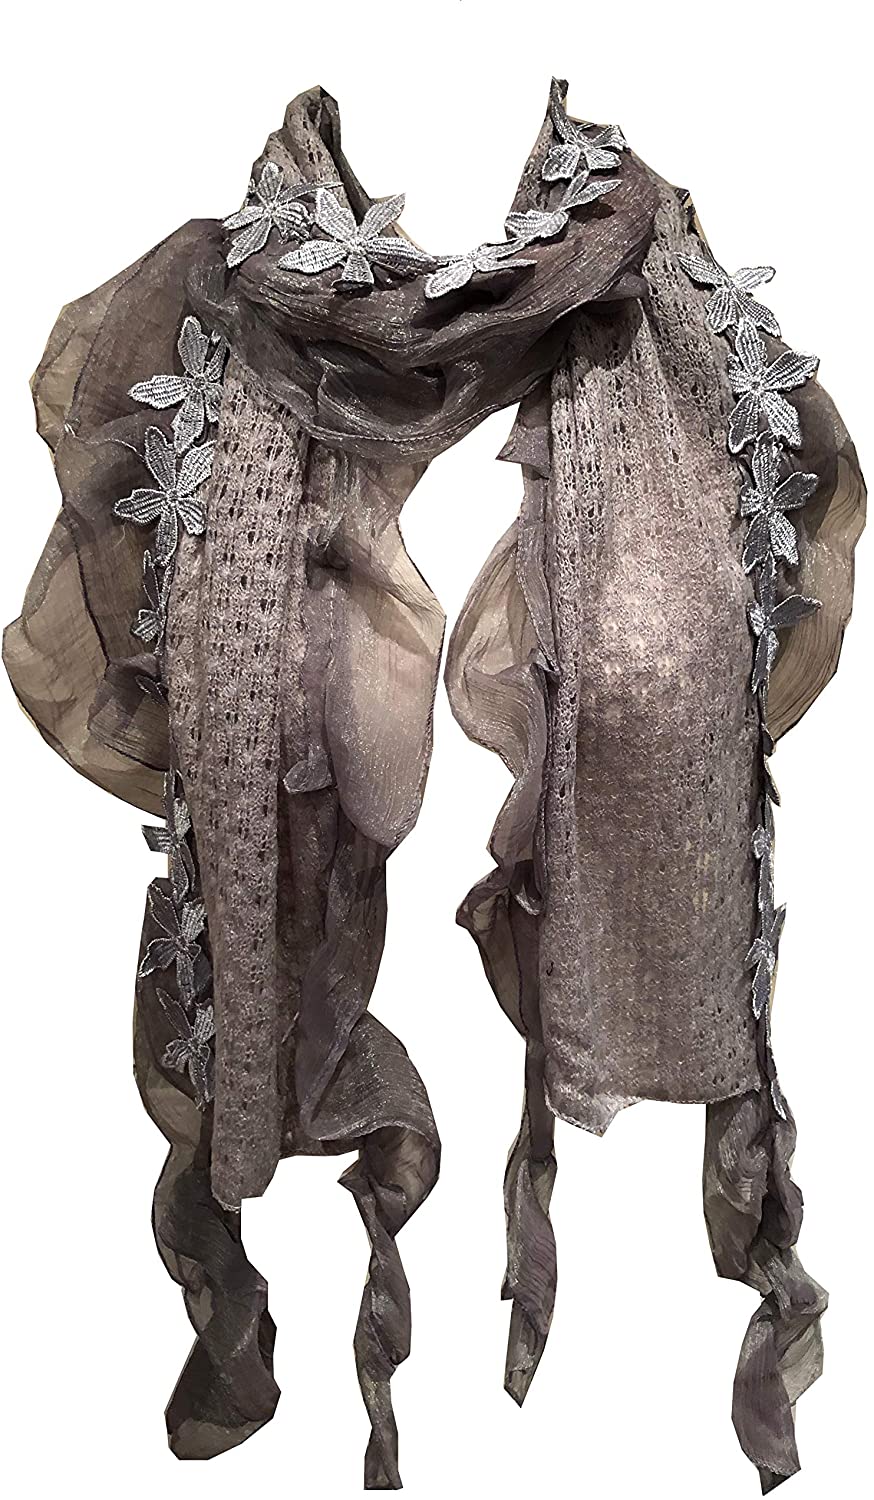 Pamper Yourself Now Grey with Flower with Chiffon Design Scarf. Long Soft Scarf